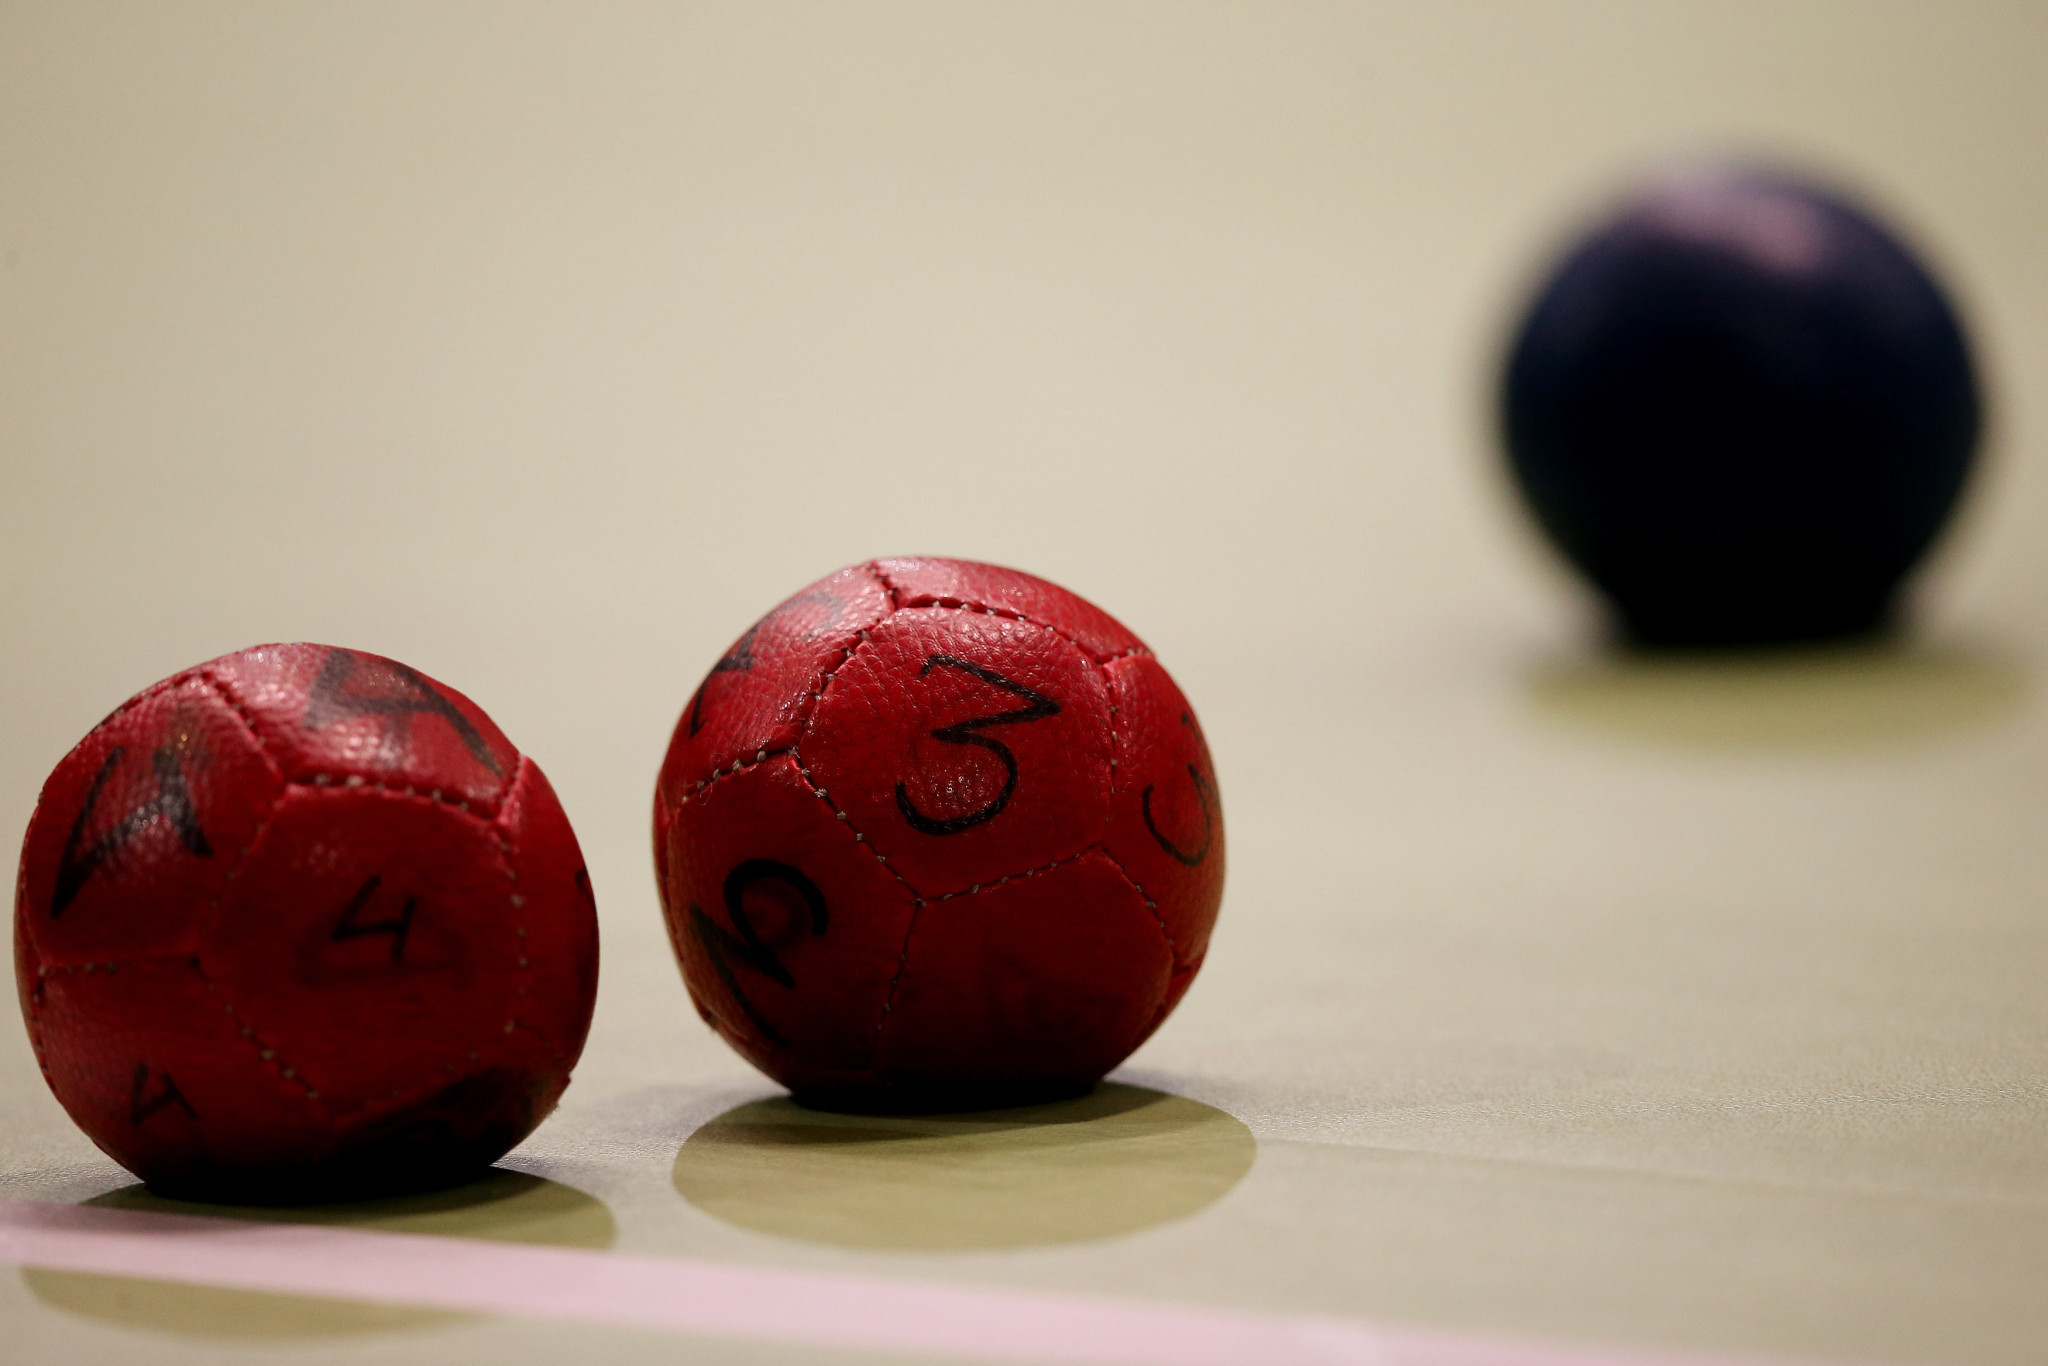 Despite a protest petition numbering more than 2,000 signatures, BISFed is going ahead with a plan to license production of boccia balls at international level following widespread instances of them being manipulated for unfair advantage ©BISFed